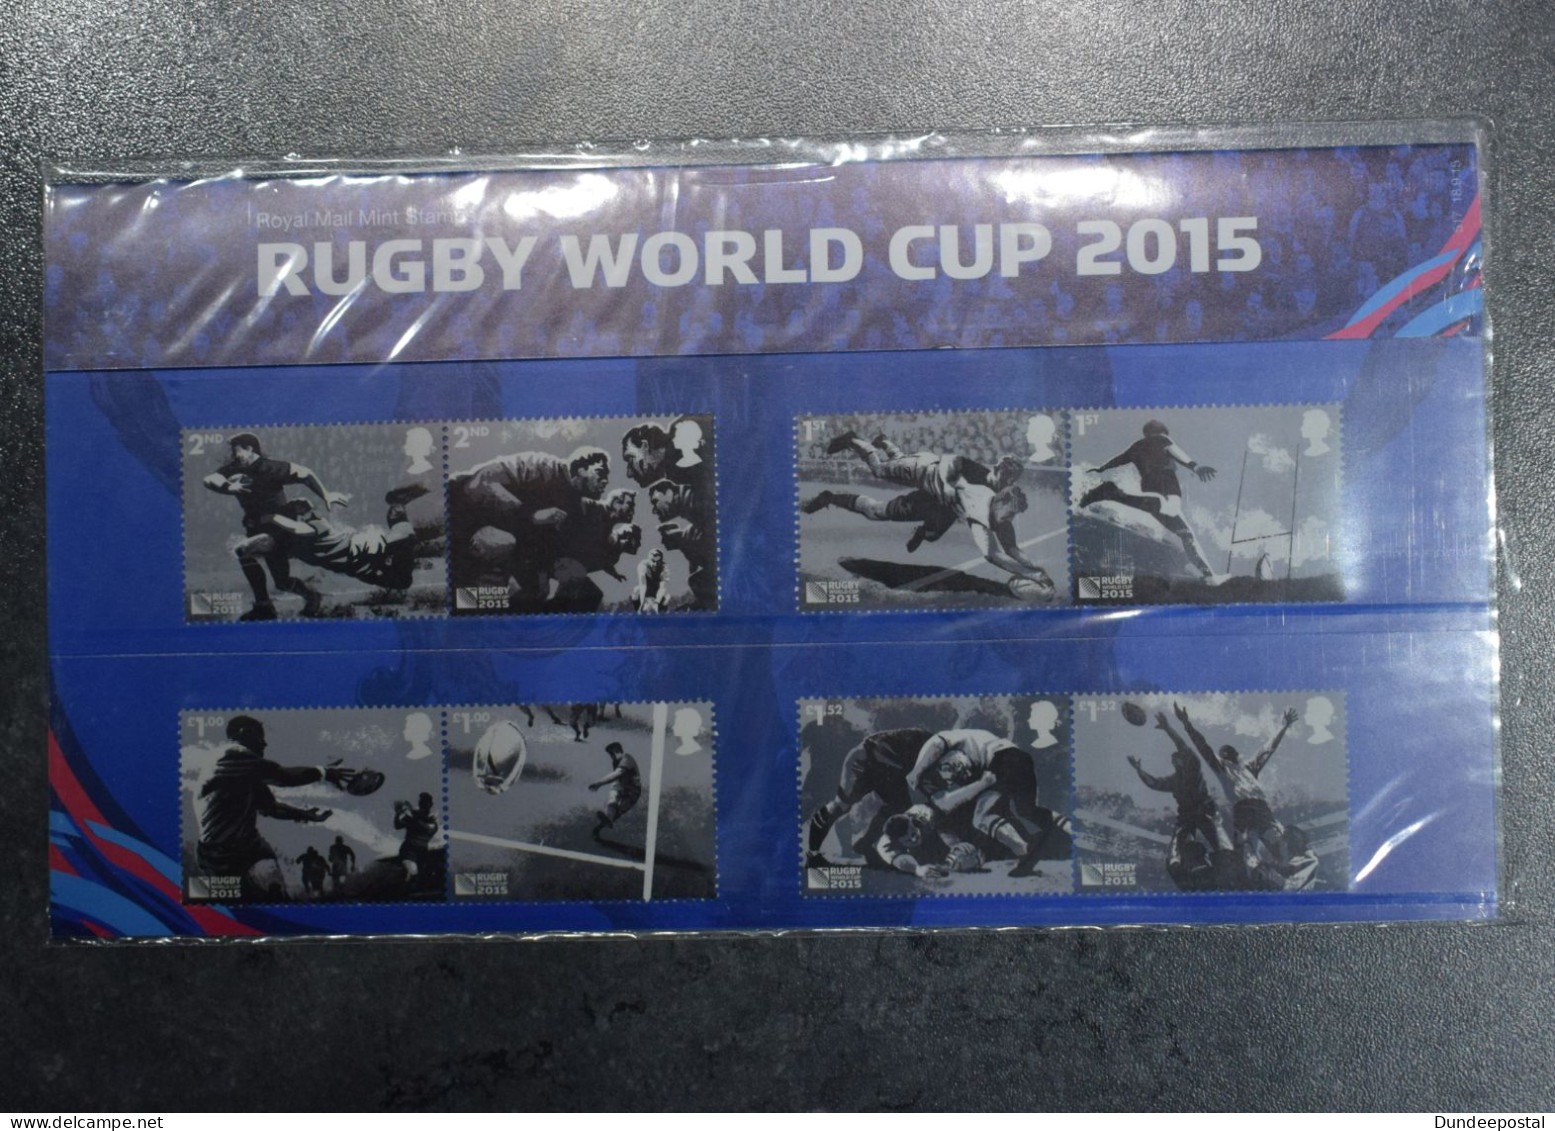 GB STAMPS  2015   PP517  Rugby World Cup  MNH     ~~L@@K~~ - Presentation Packs